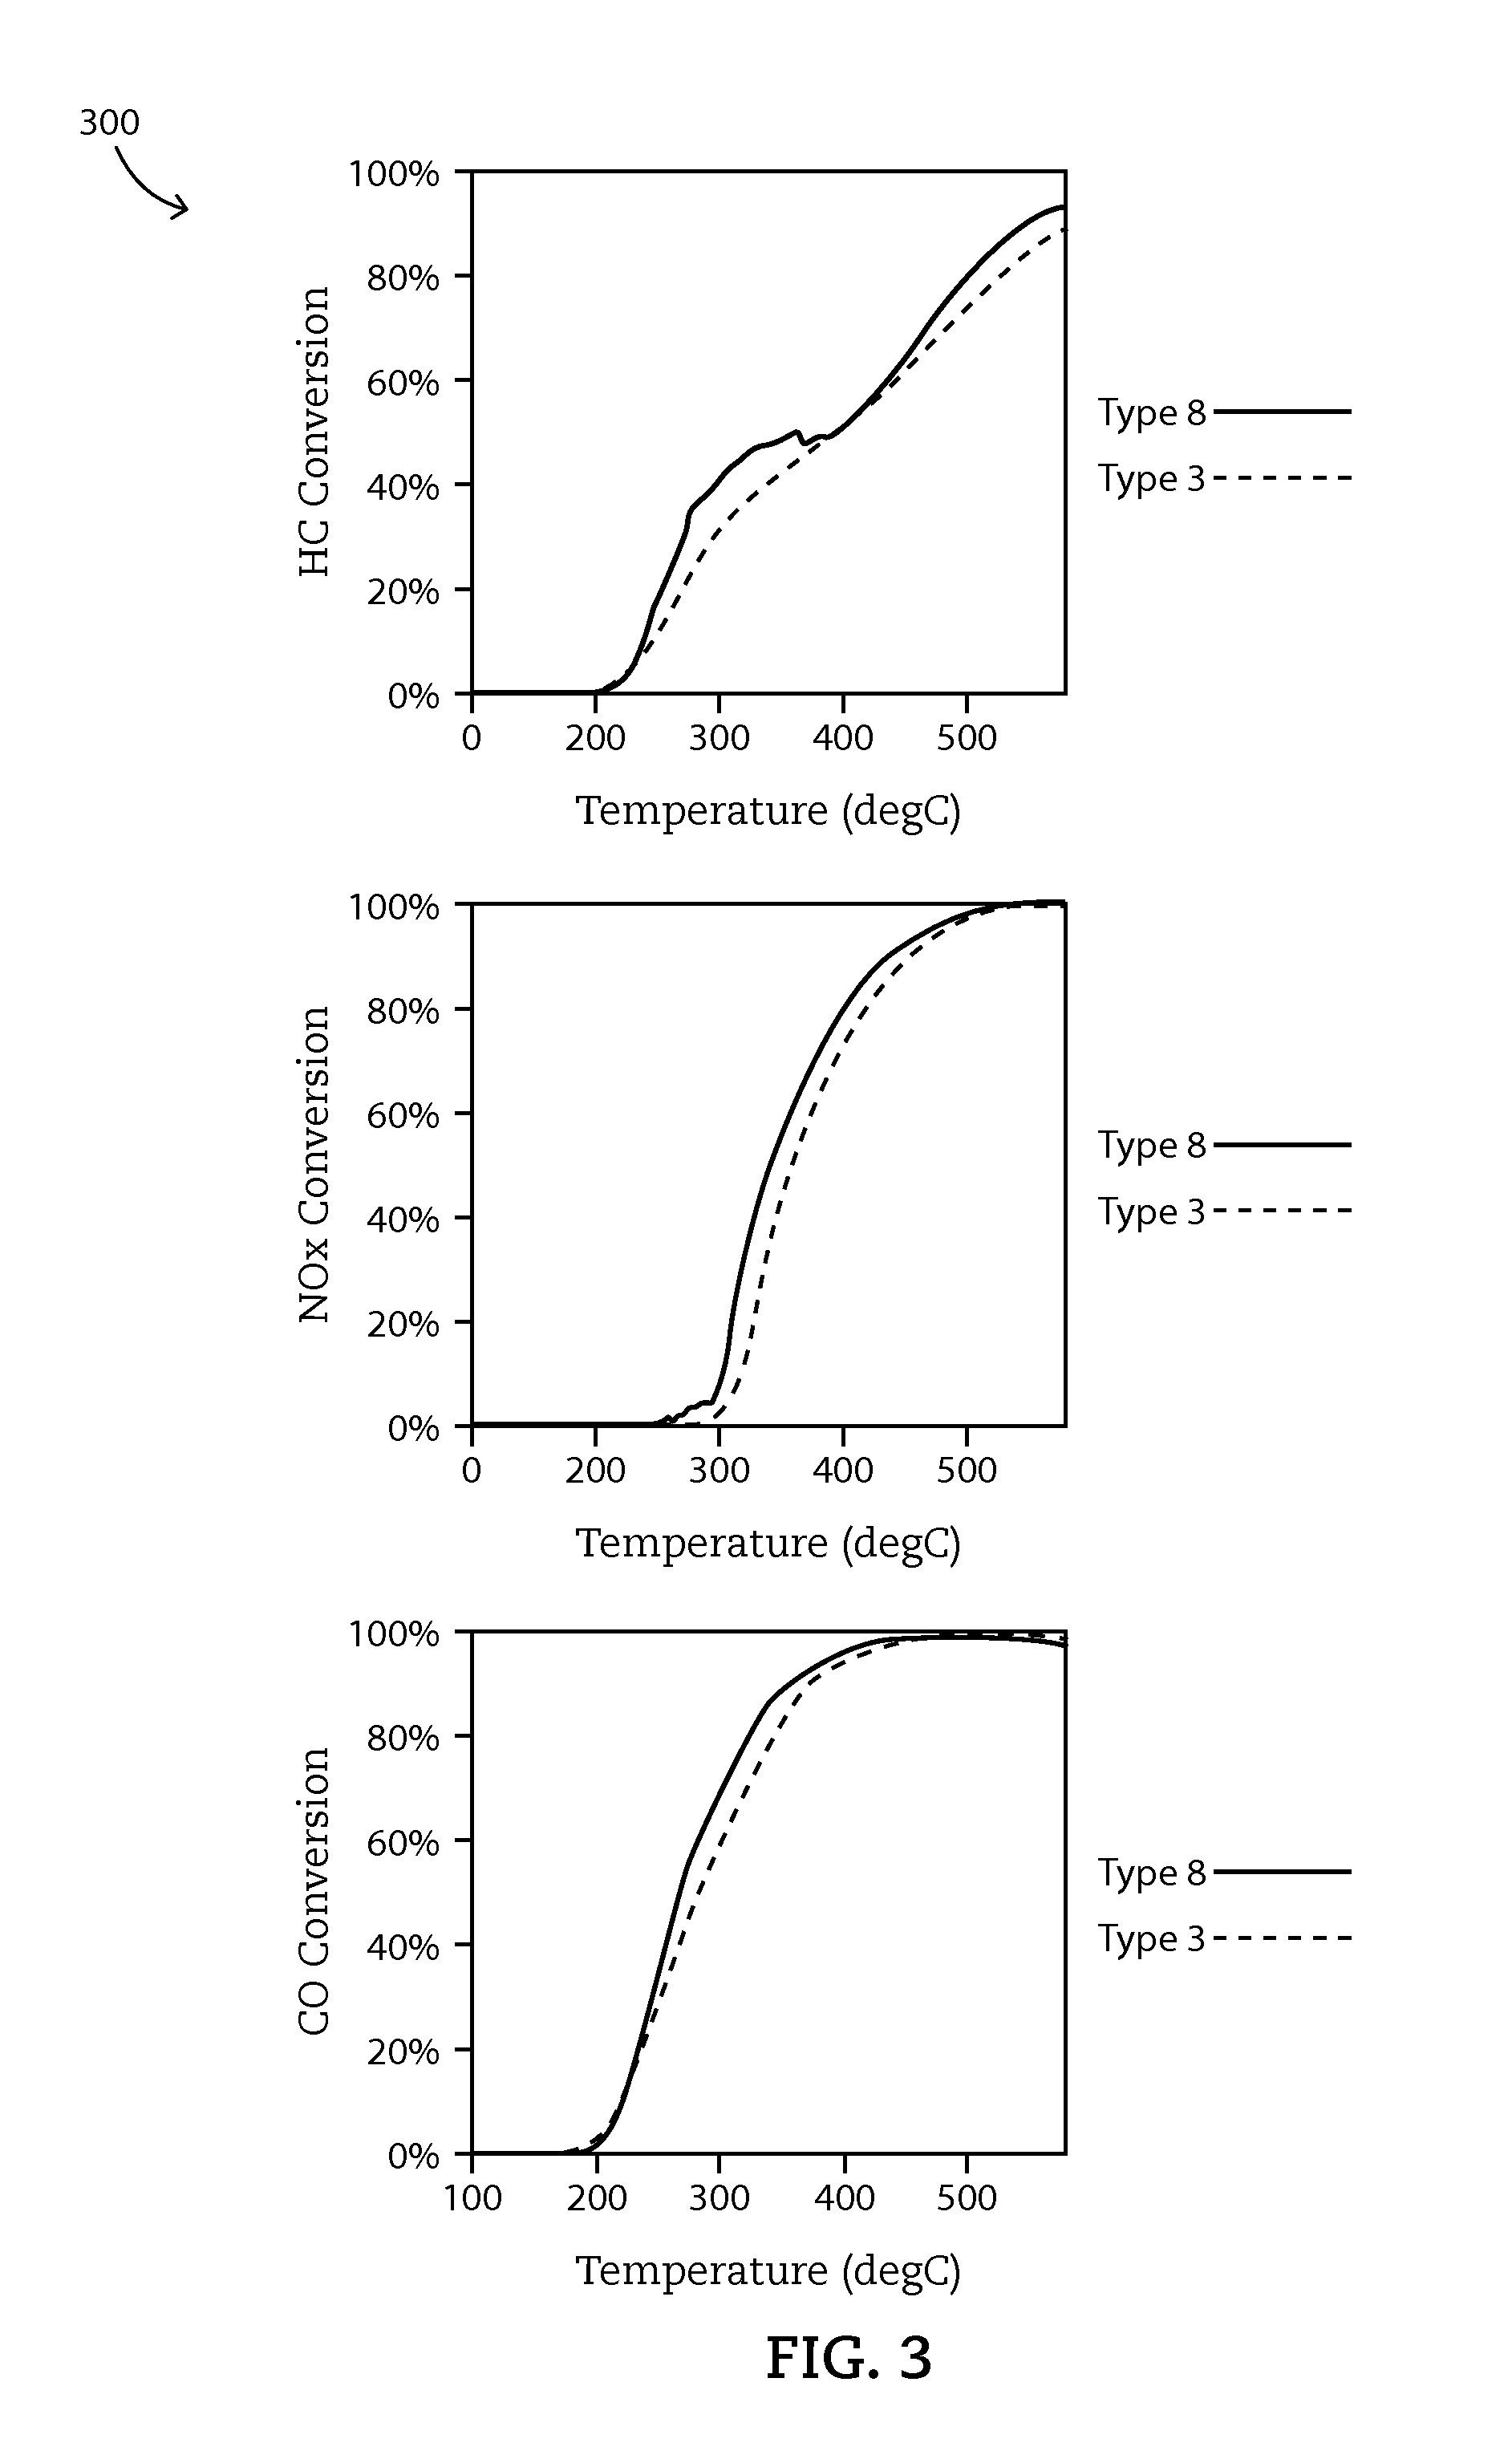 ZPGM Catalyst Systems and Methods of Making Same